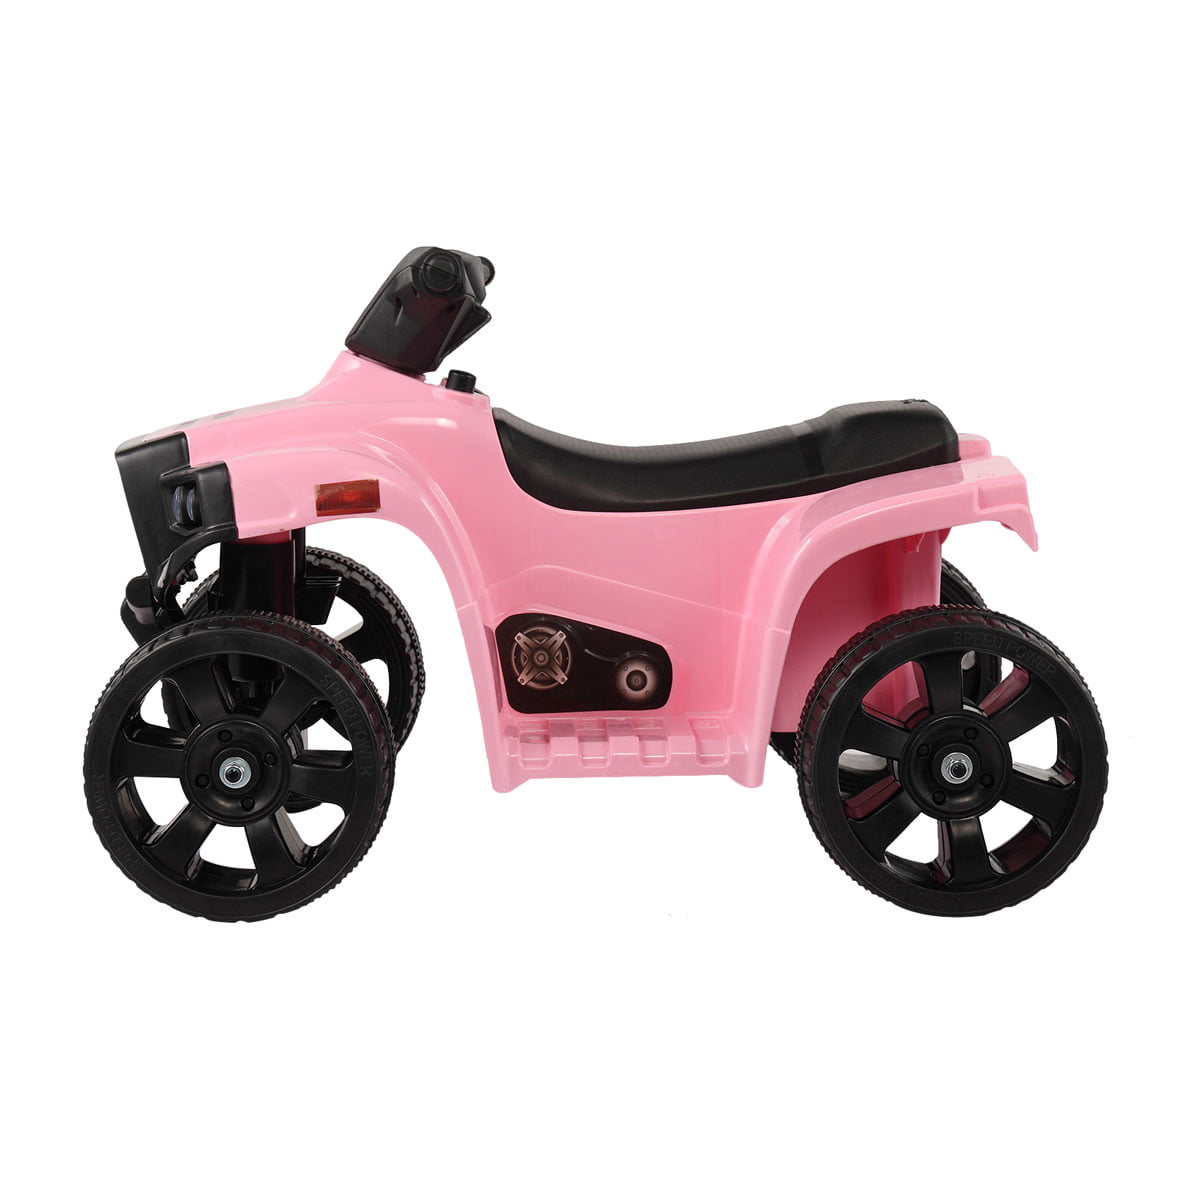 Details about   Kids Child 6V Classic Ride On Toy Car Push Foot-to-Floor Toddler Walker 2 Colors 